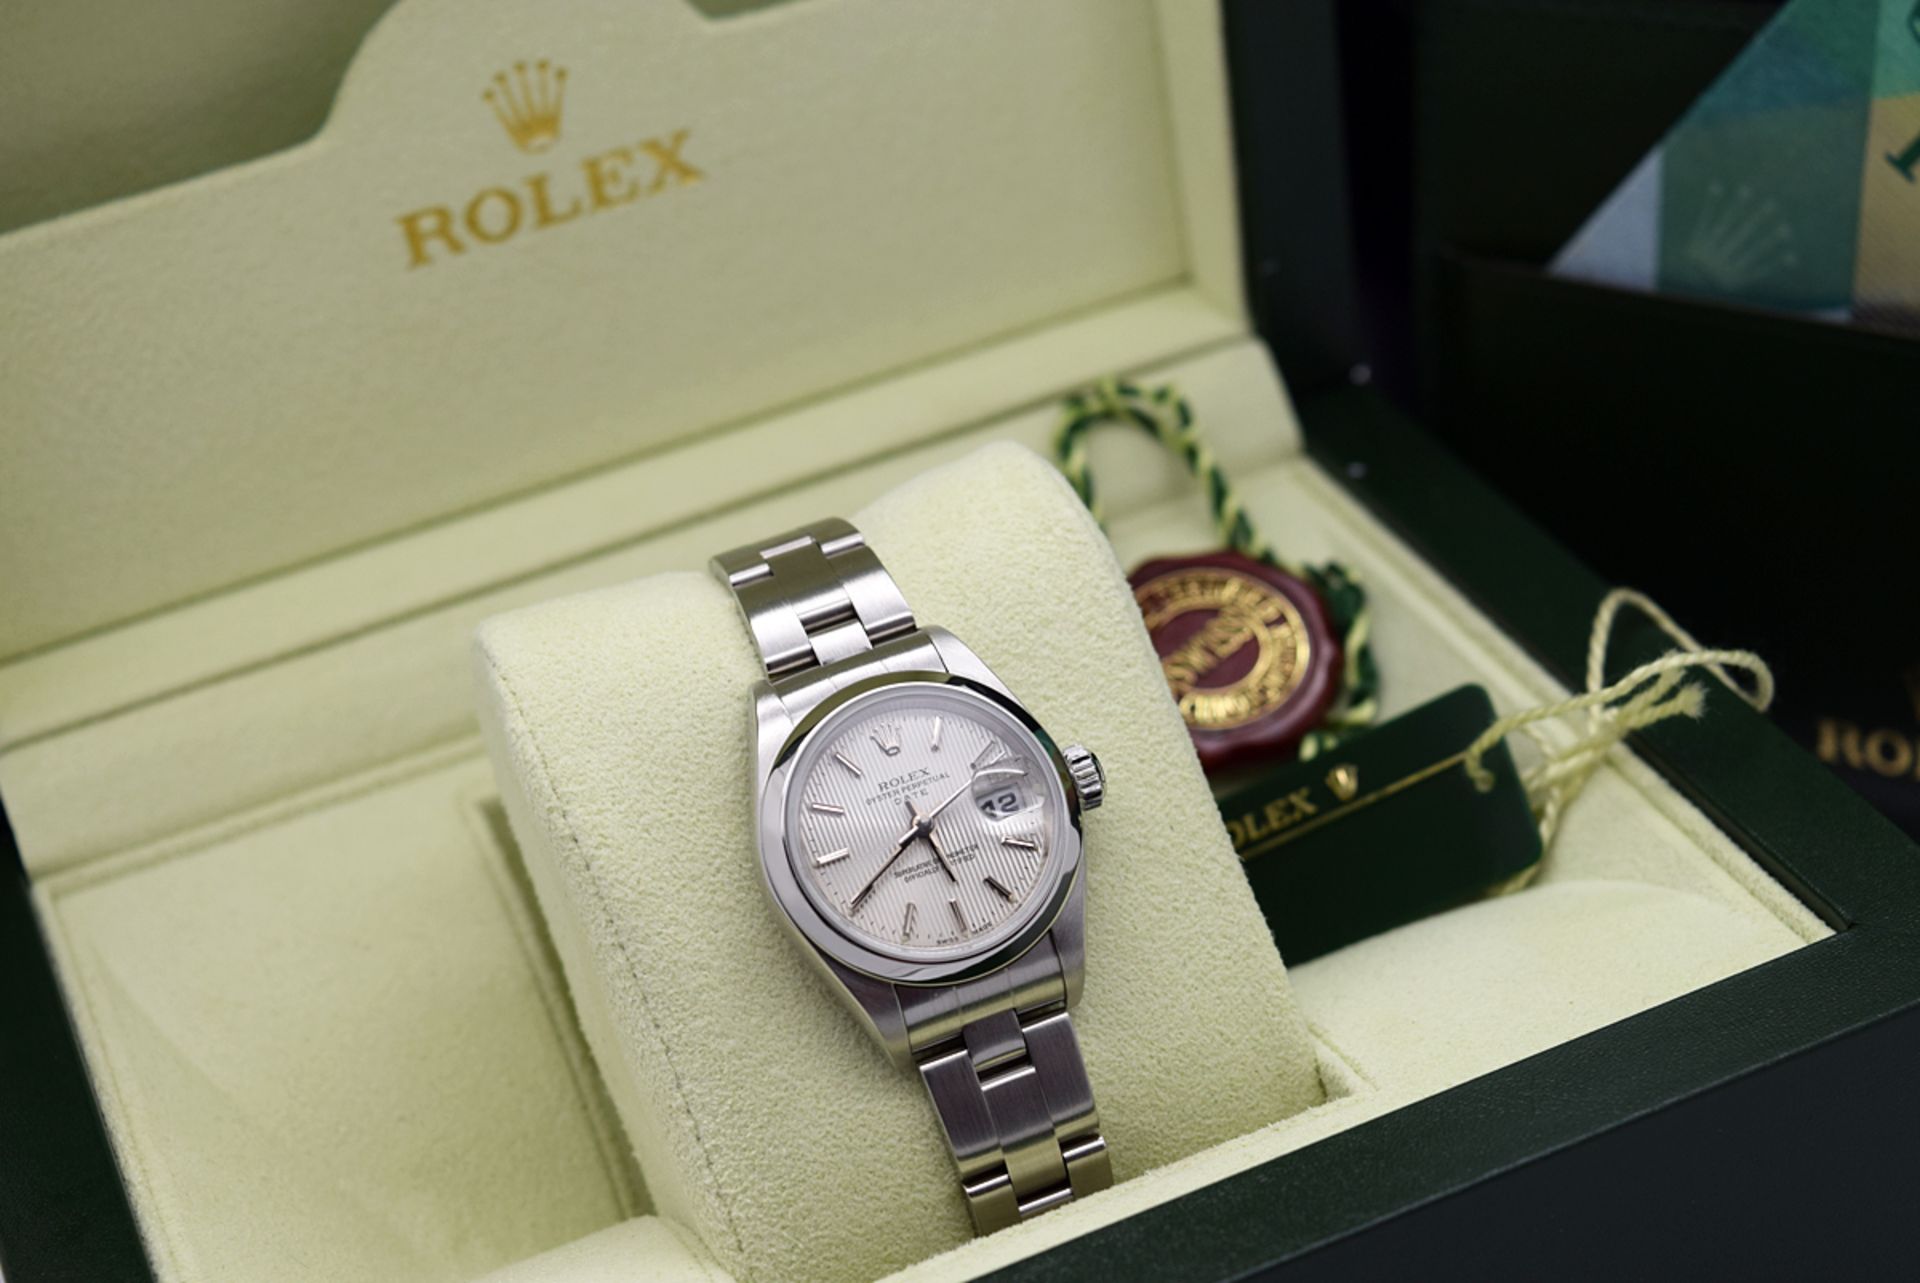 *STUNNING* ROLEX DATEJUST (LADIES) - STEEL with a SILVER TAPESTRY DIAL - Image 8 of 8